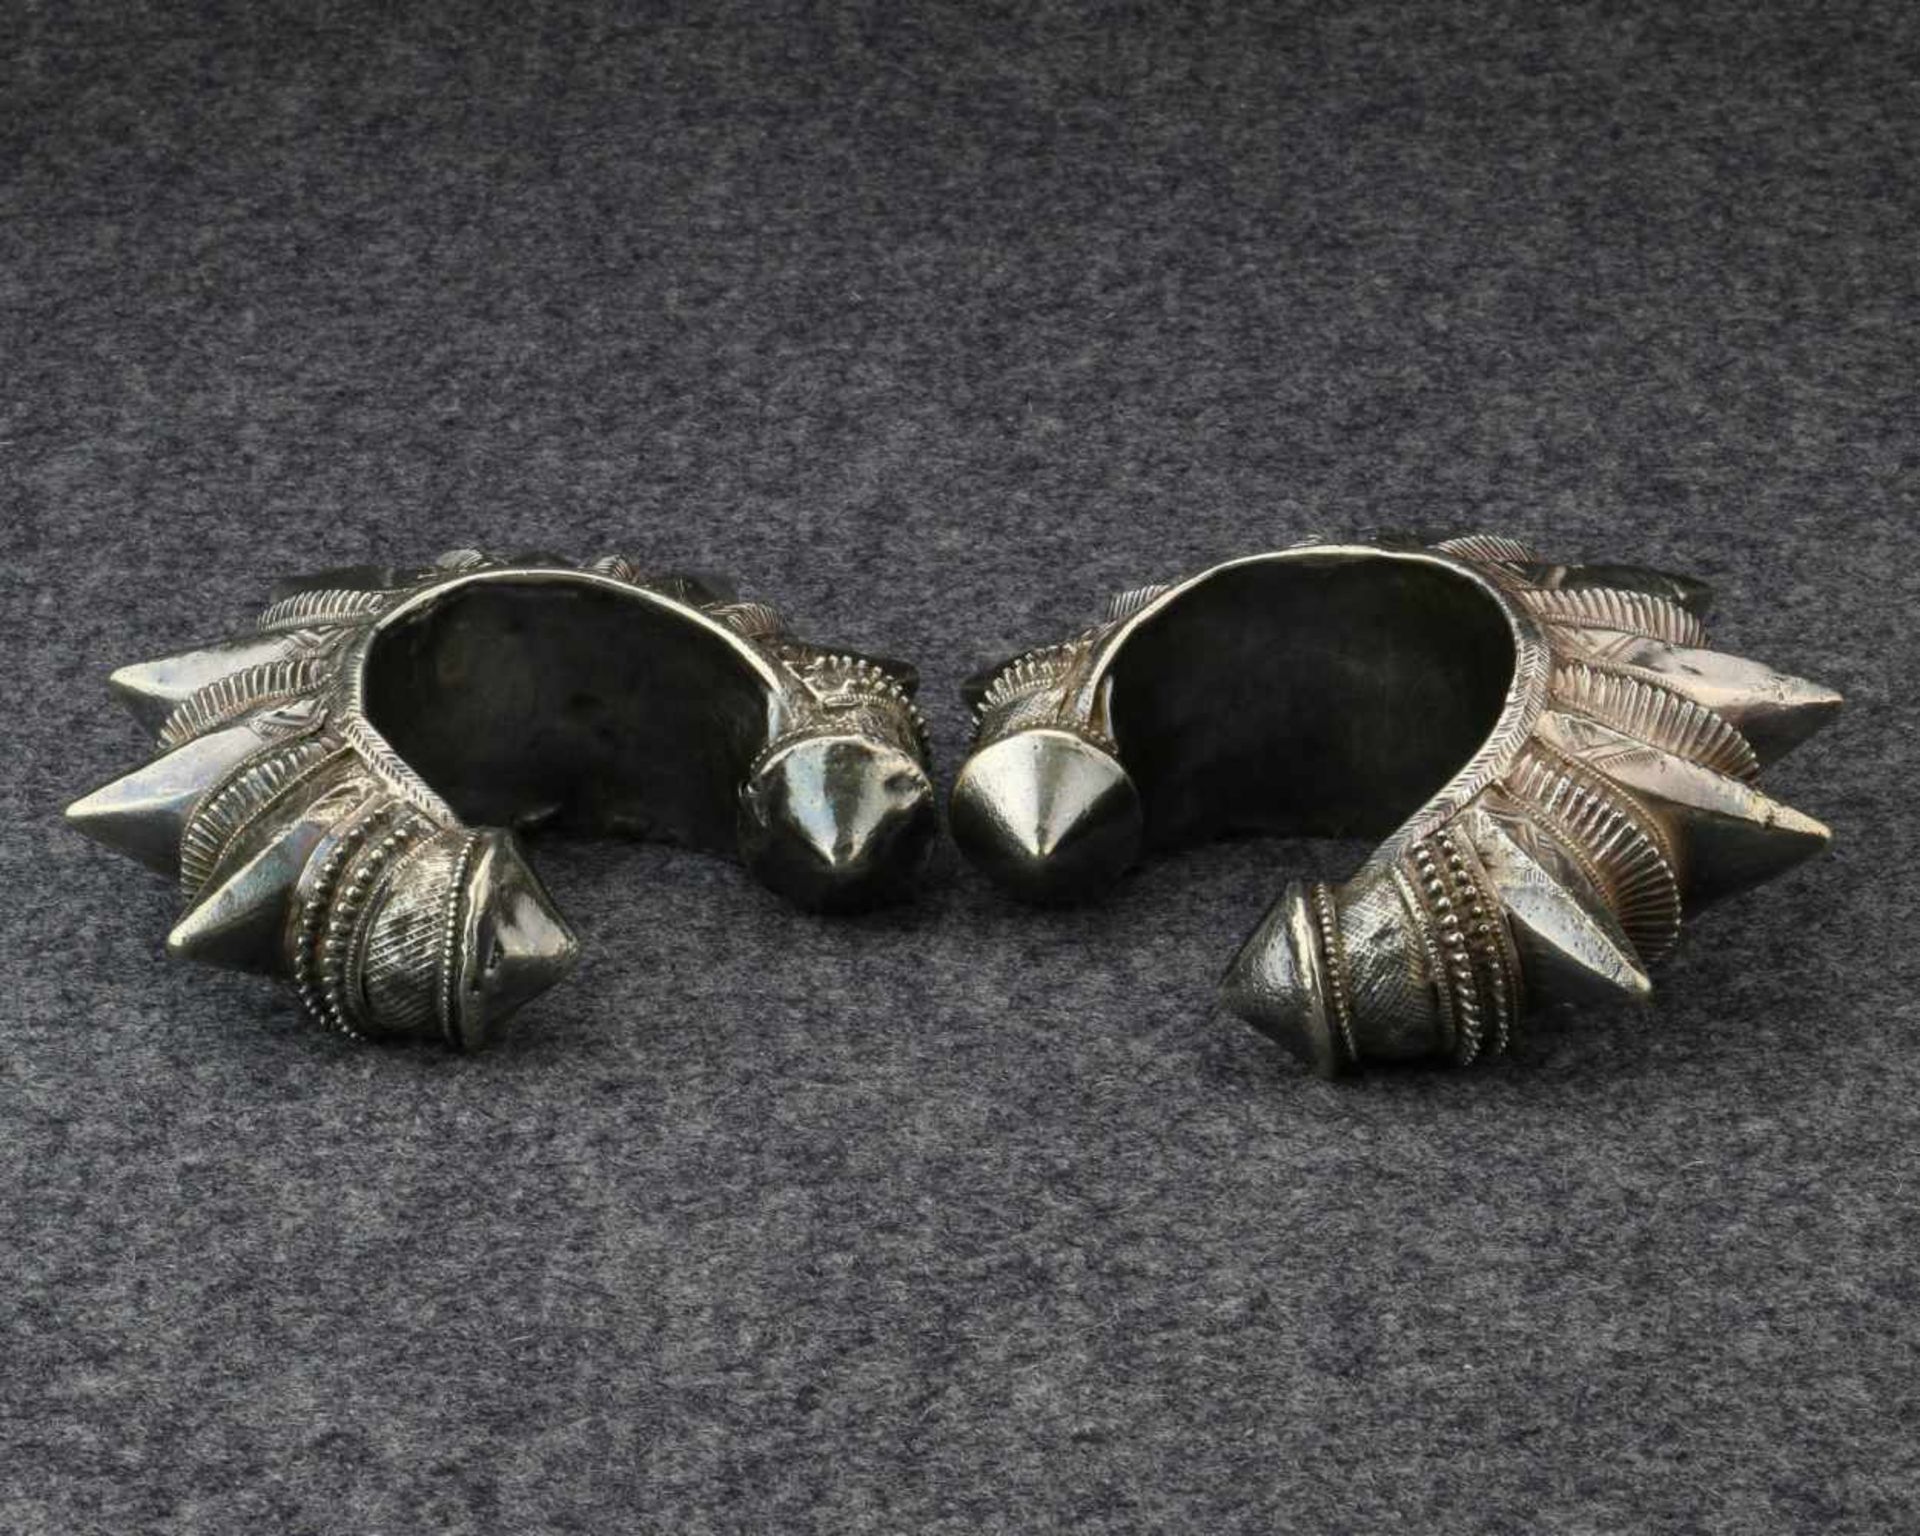 Pakistan, a pair of hollow silver woman's bracelets, 'Gokhru',with spikes, designed to protect the